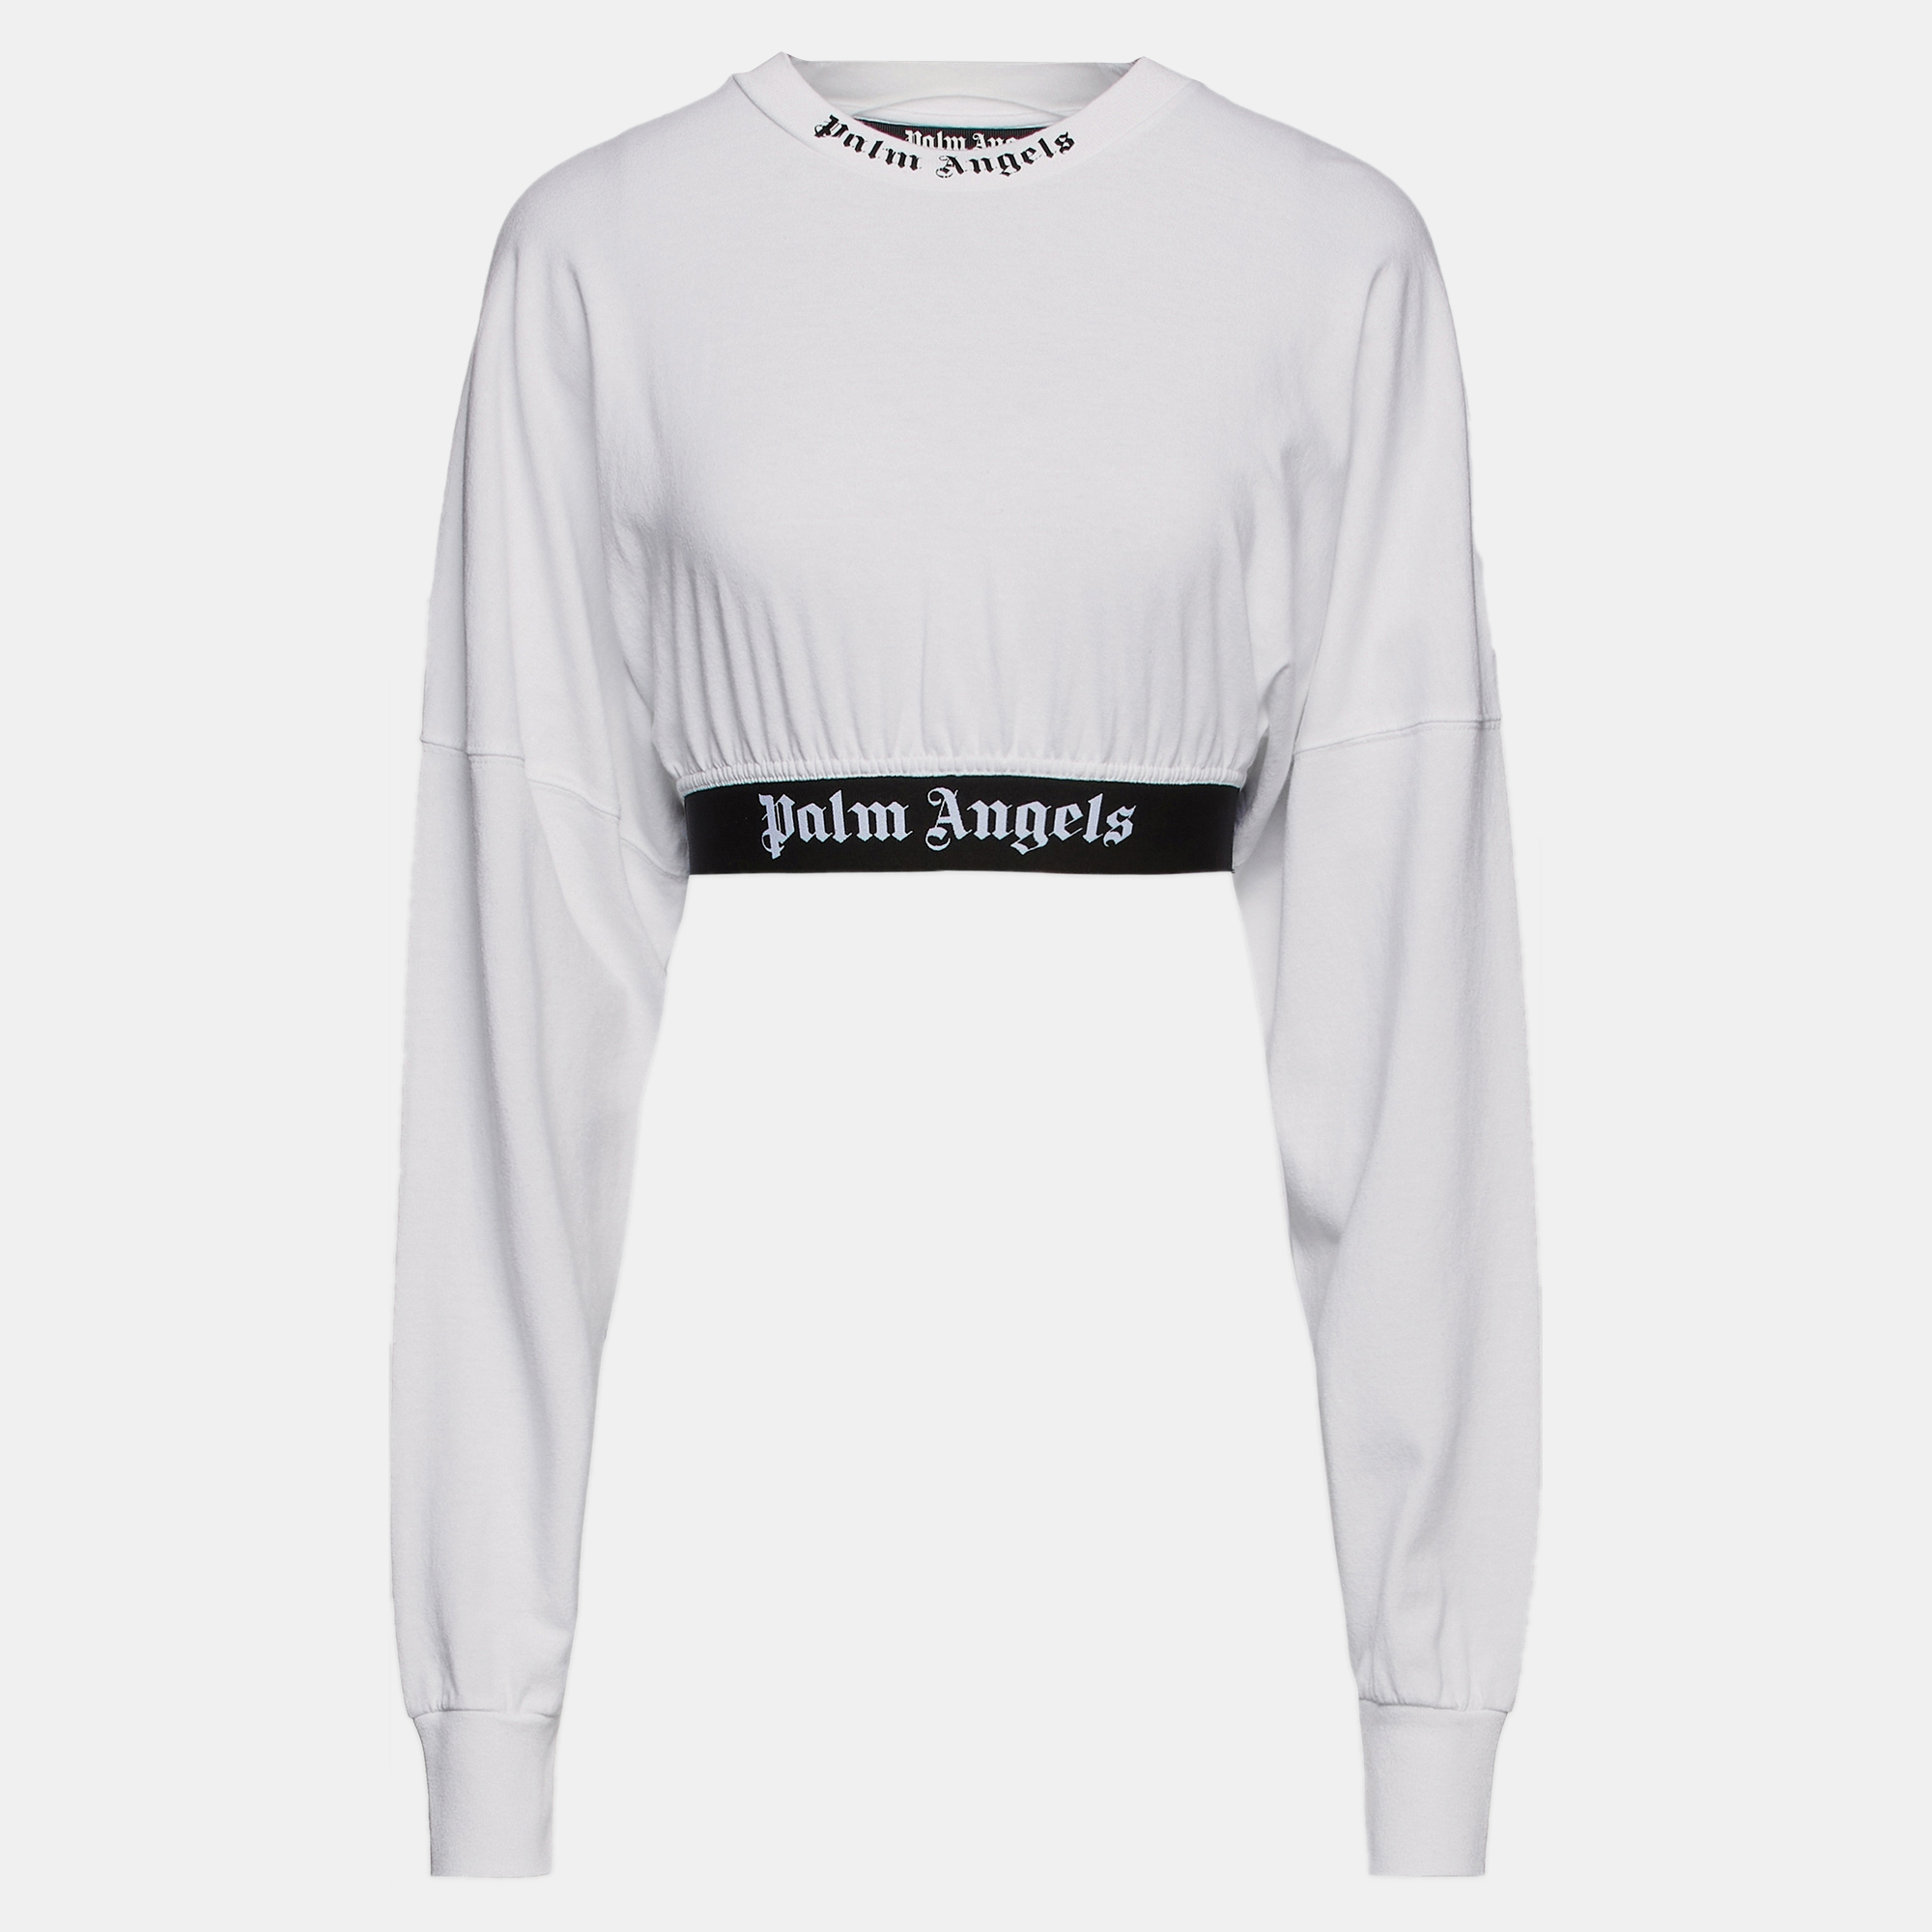 Palm angels cotton long sleeved top s